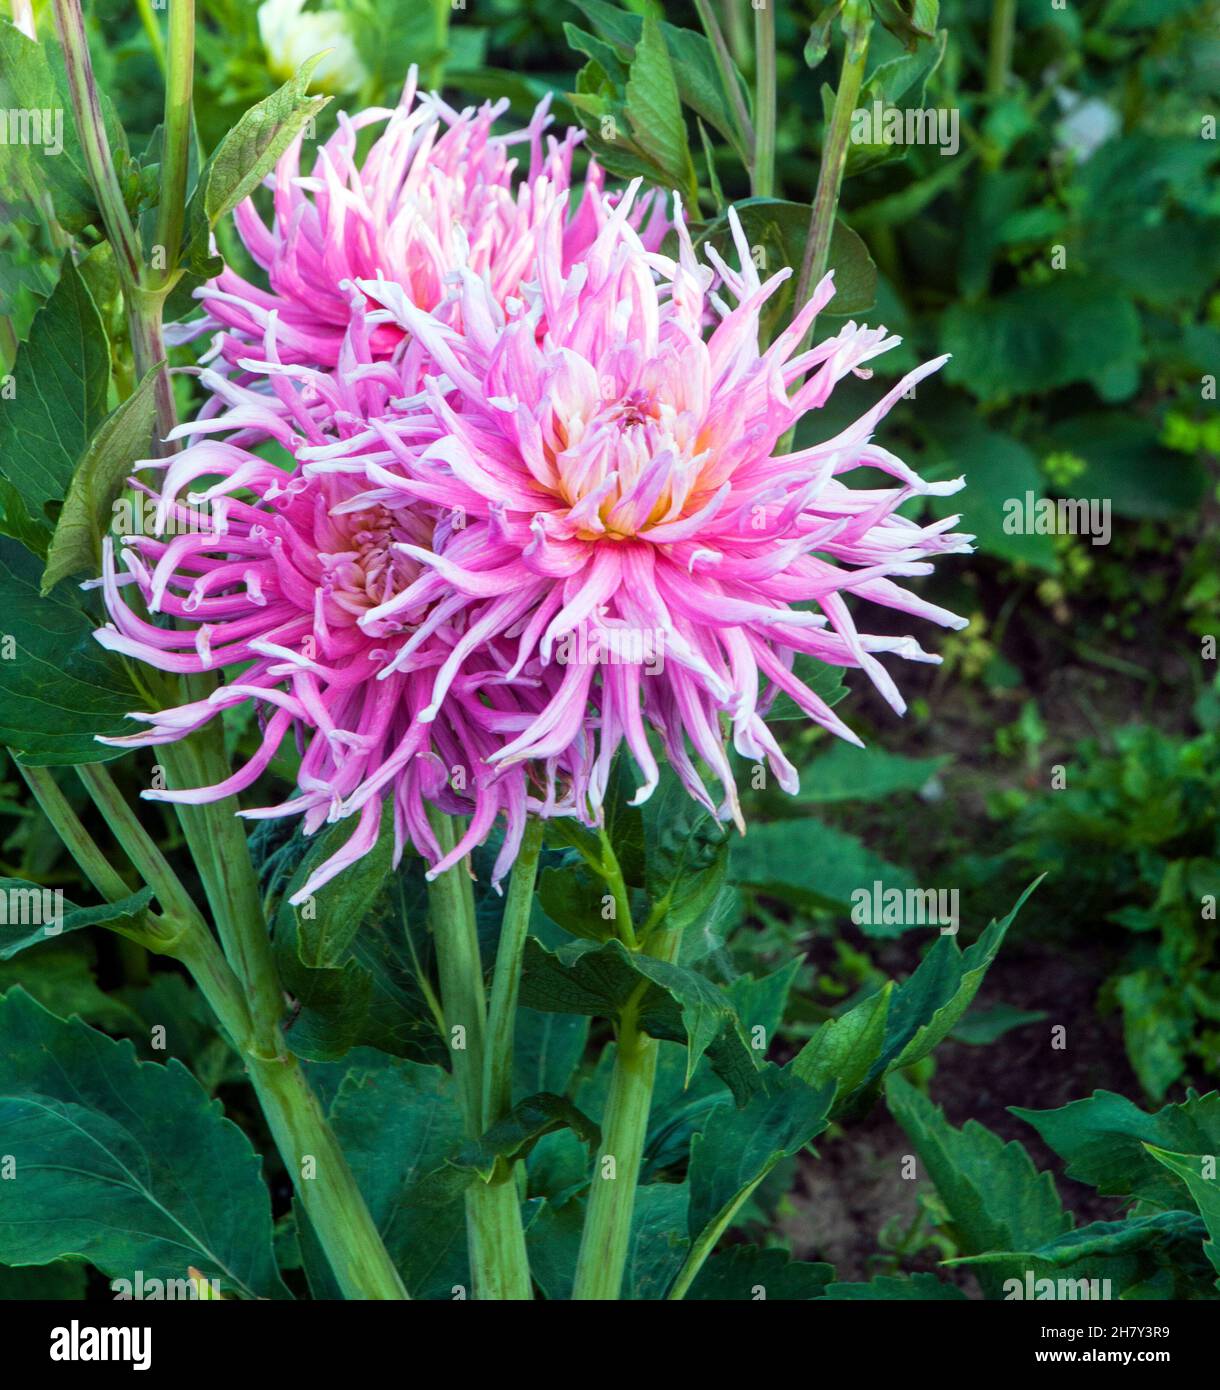 Close up of flower of cactus dahlia Stars Favorite. A large pink and white fully double bushy dahlia that flowers through summer into autumn Stock Photo